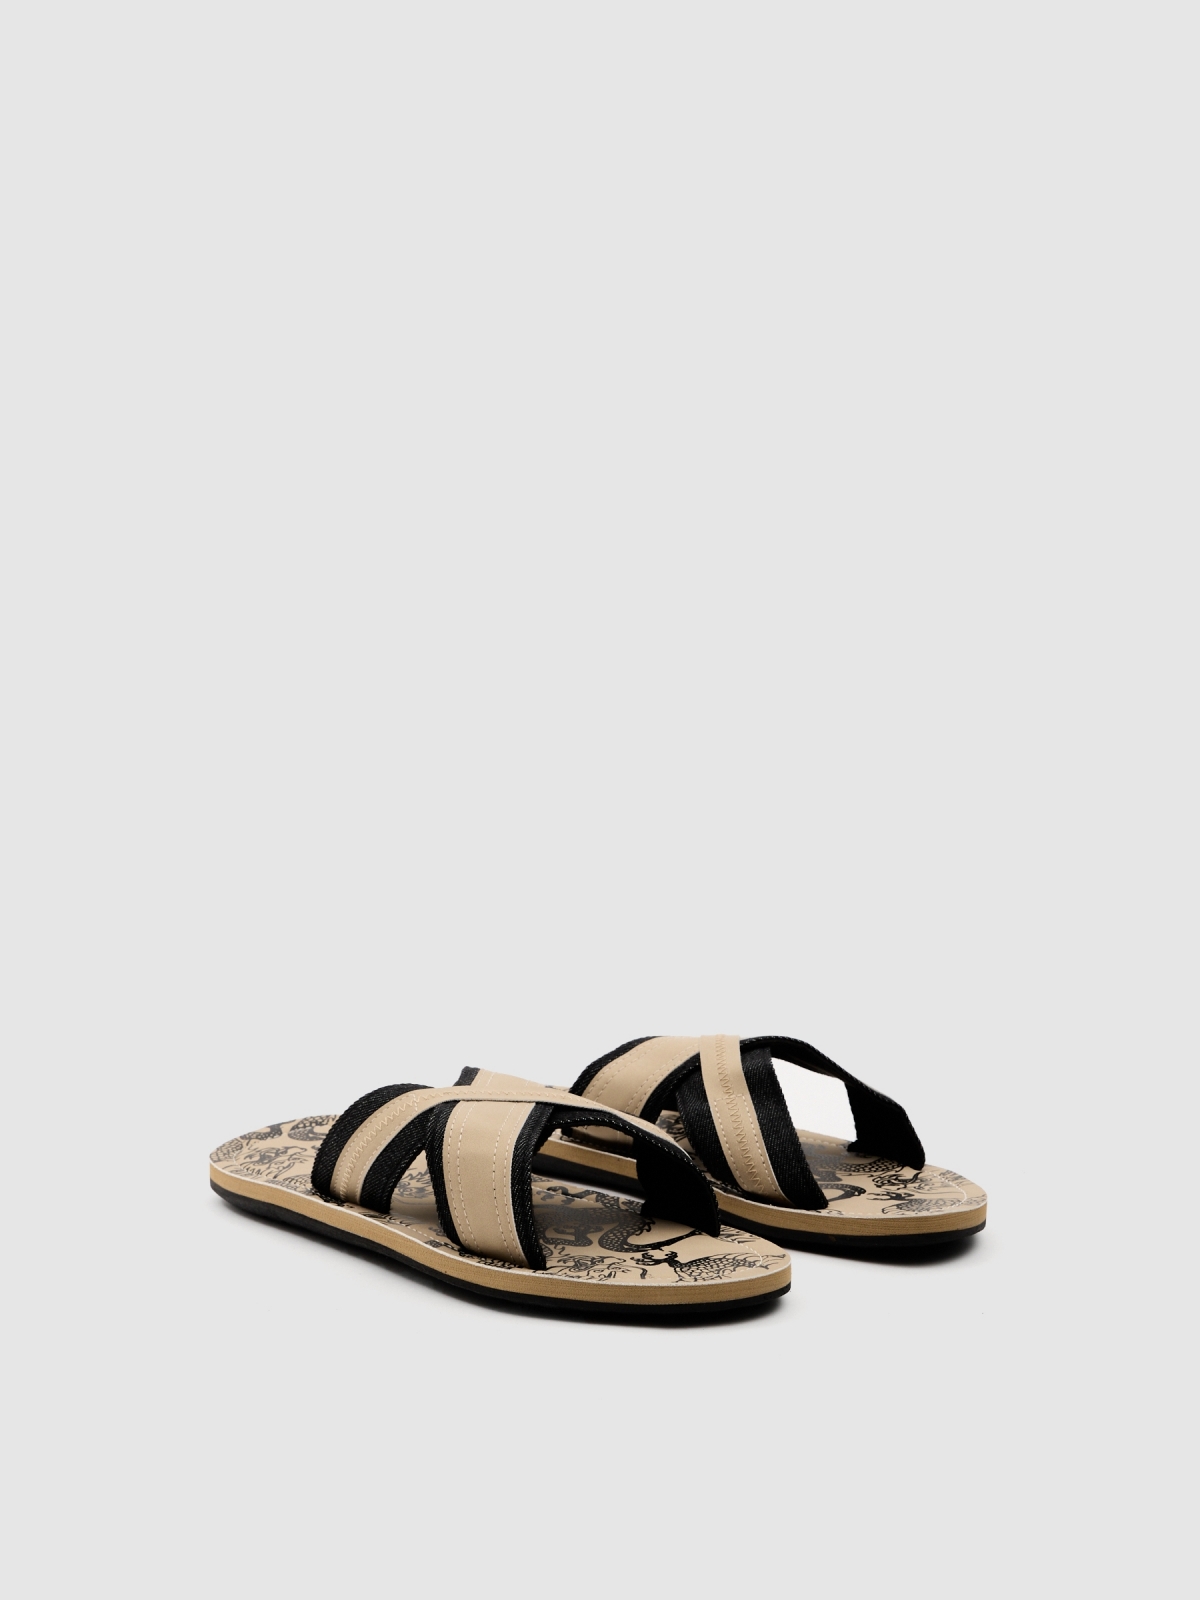 Crossed sandals sand 45º front view